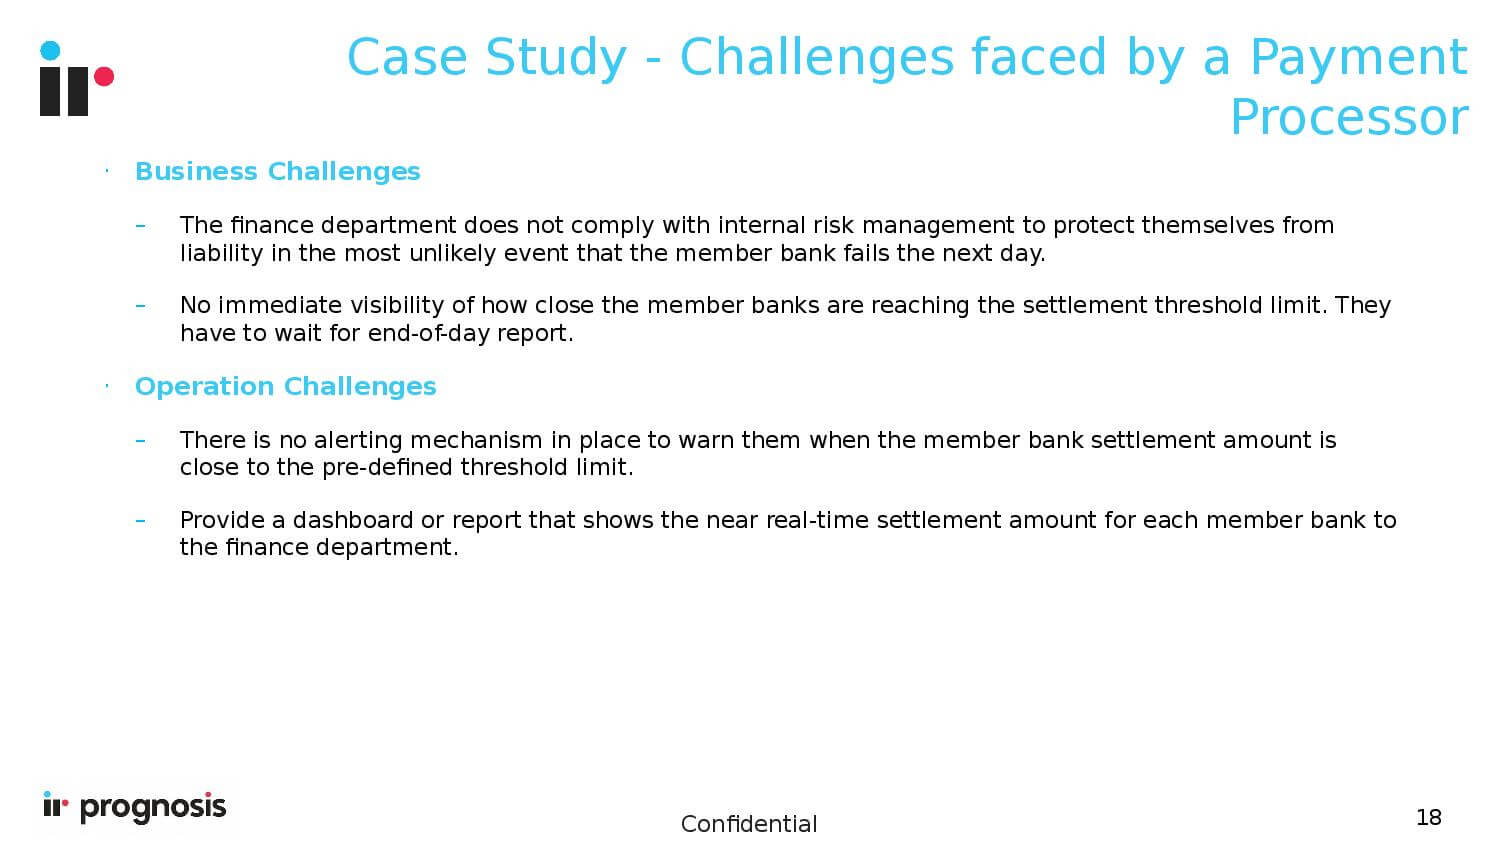 Case Study - Challenges faced by a Payment Processor